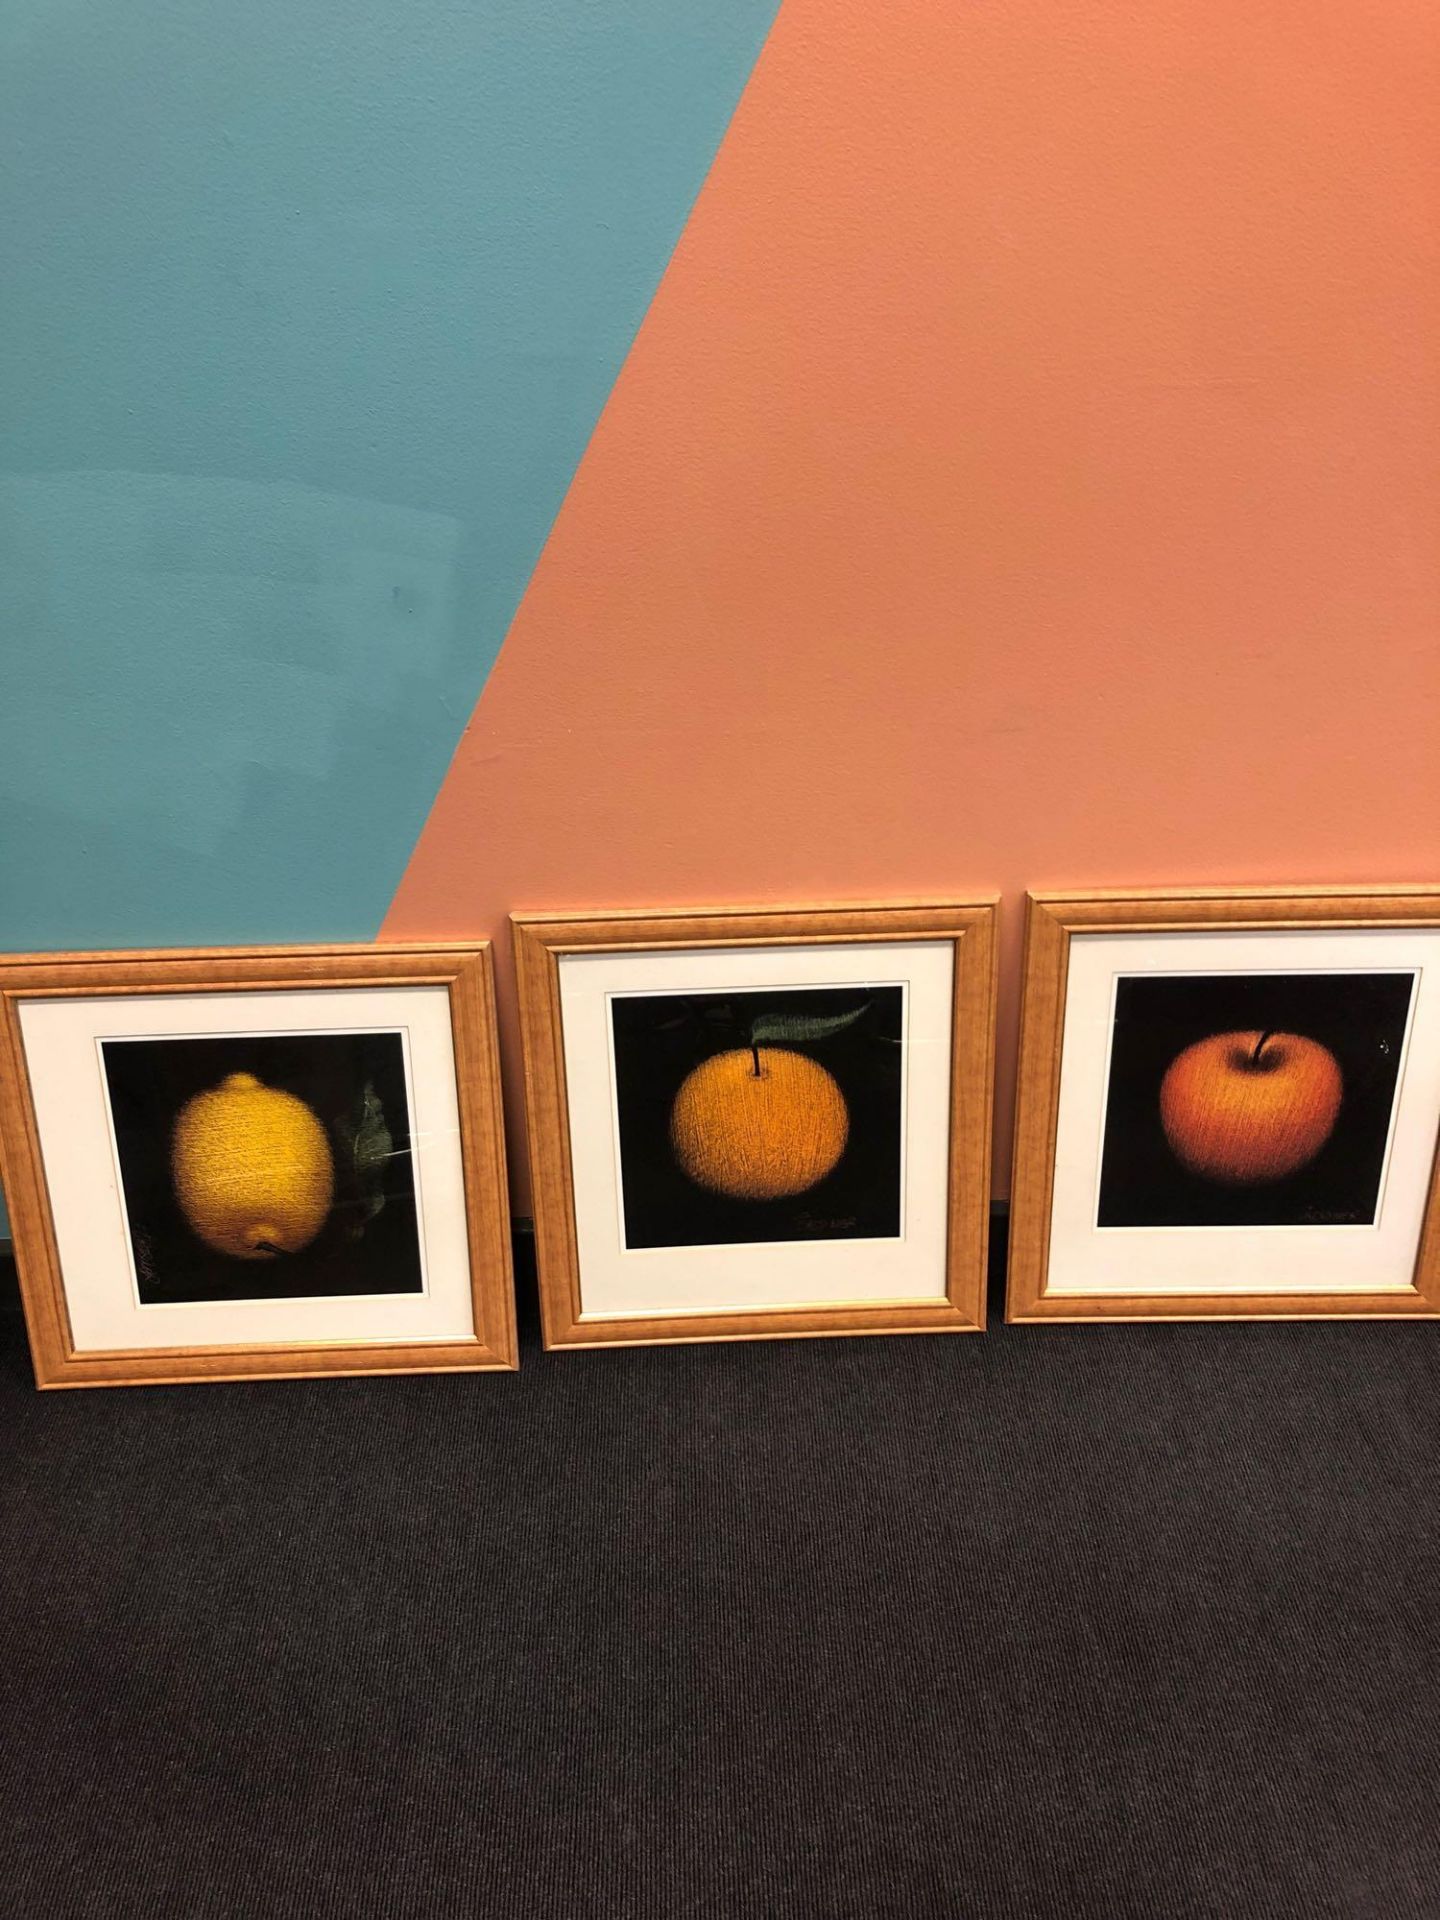 3 x Fruit Prints Of Lemon Orange And An Apple And A Wooden Frame 500 x 540 Mm